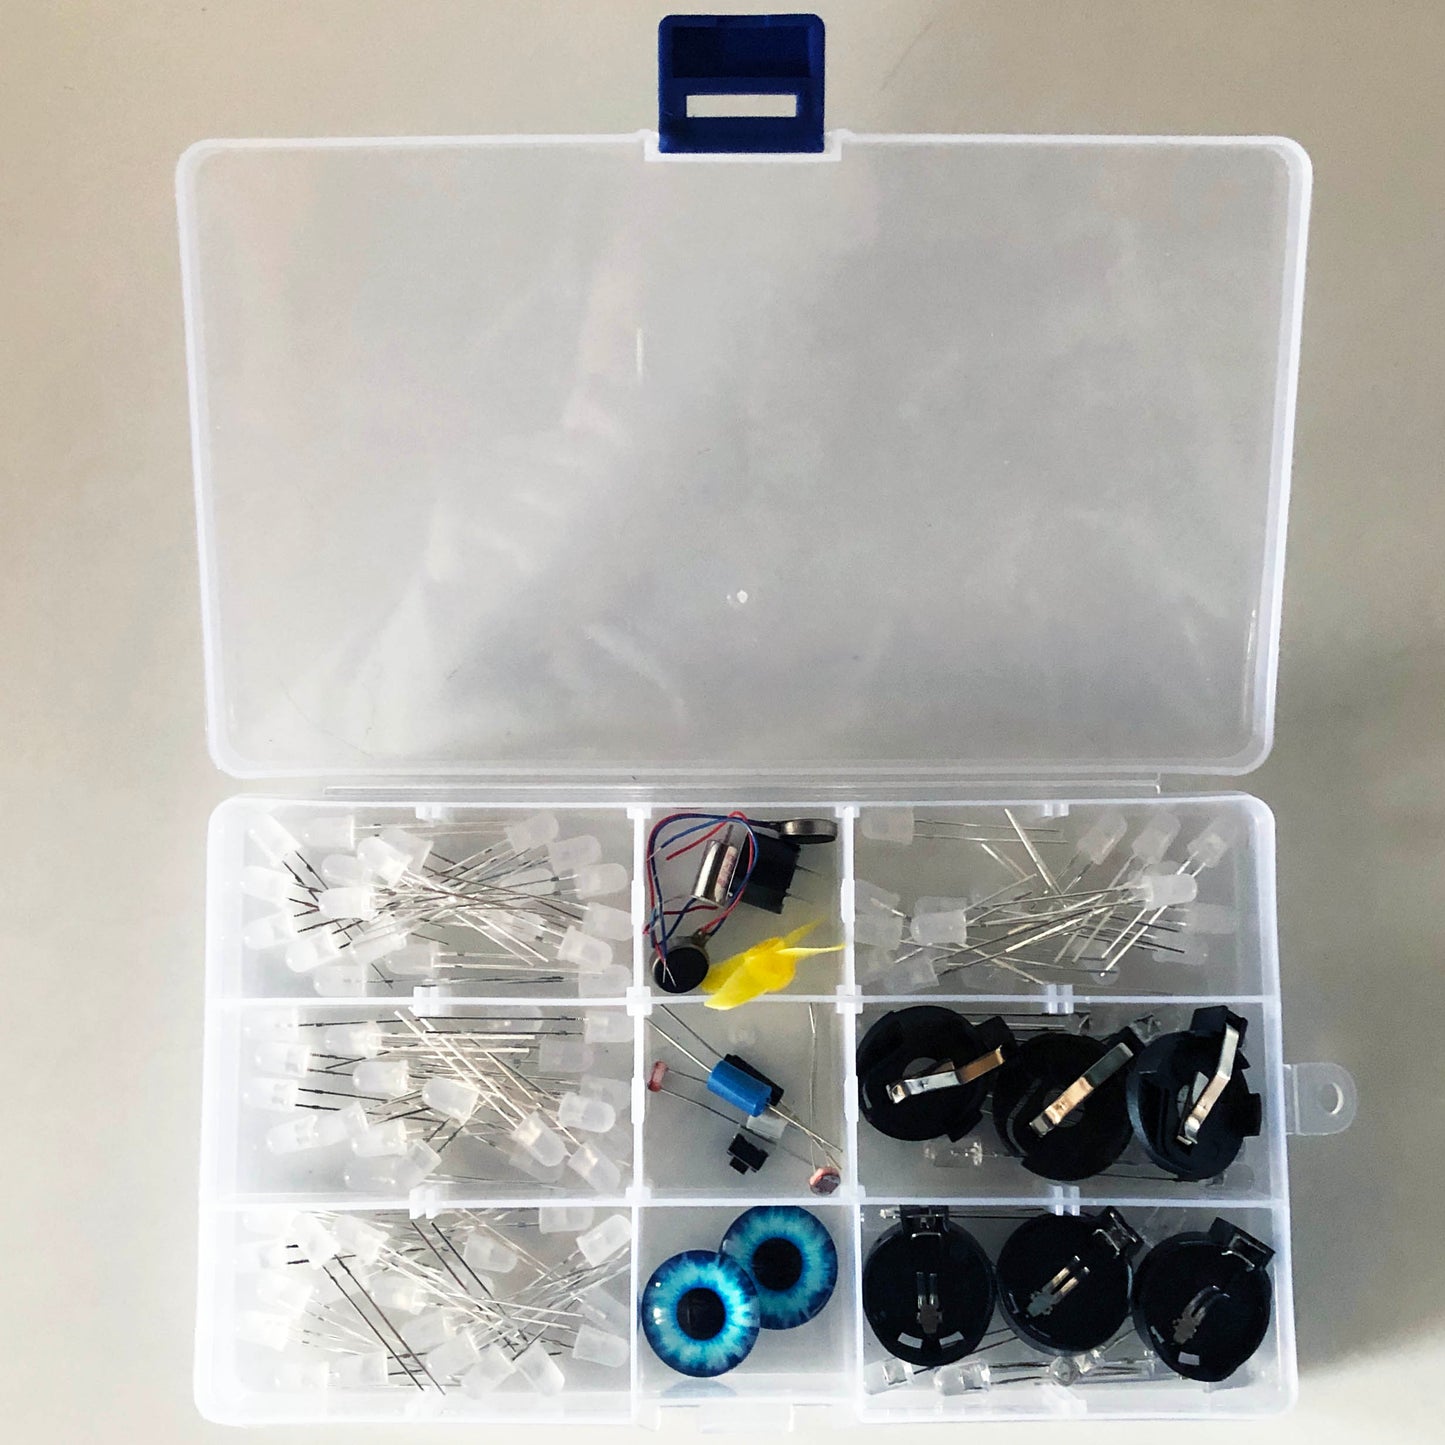 Contents of the TapeBlock making components in a plastic box. Including LEDs, switches, motors, eyes (blue glass) and battery holders all in separate sections.